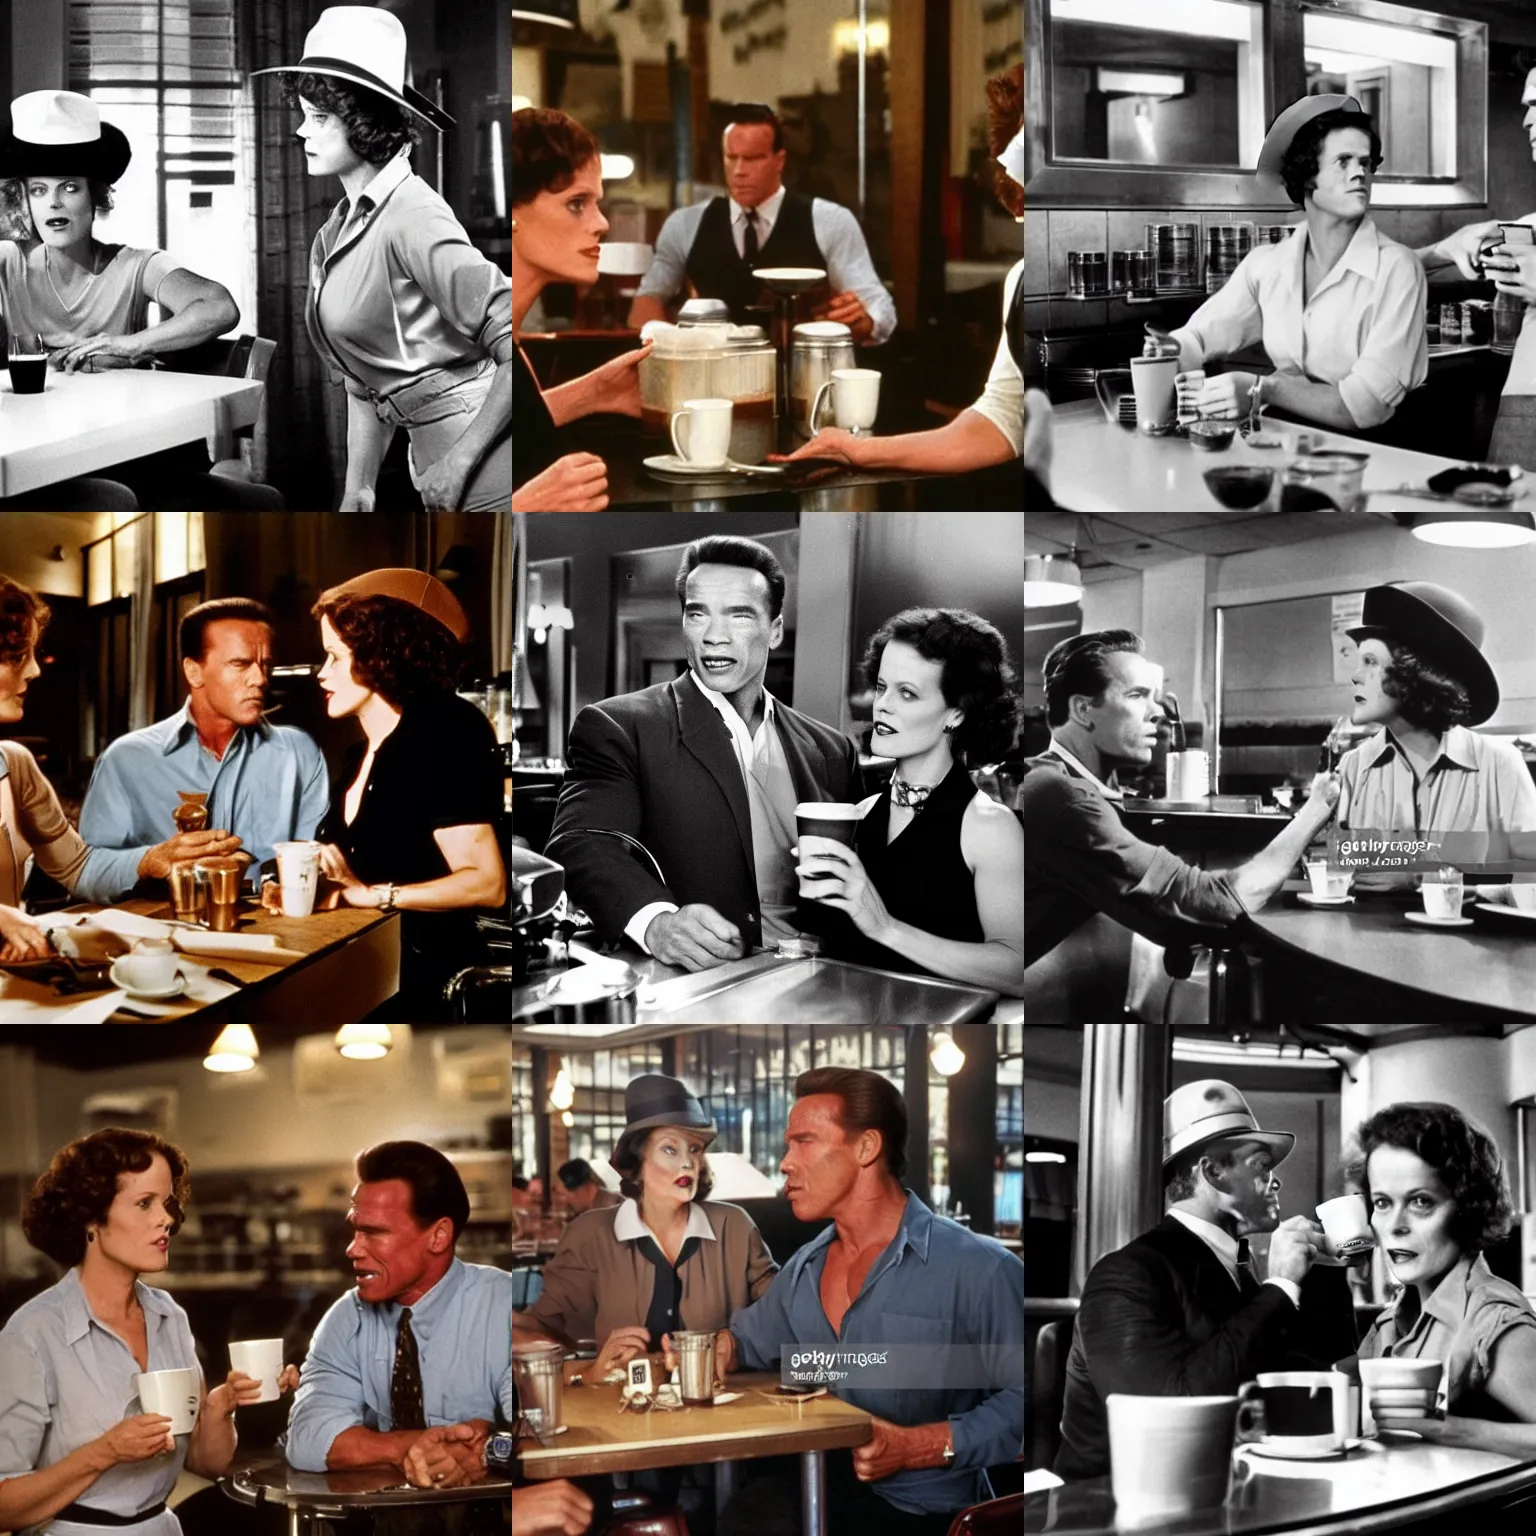 Prompt: arnold schwarzenegger as visitor in hat and shirt drink coffee, sigourney weaver as waitress on background, screen short from mafia 2, 1 9 3 0 style, diner caffee